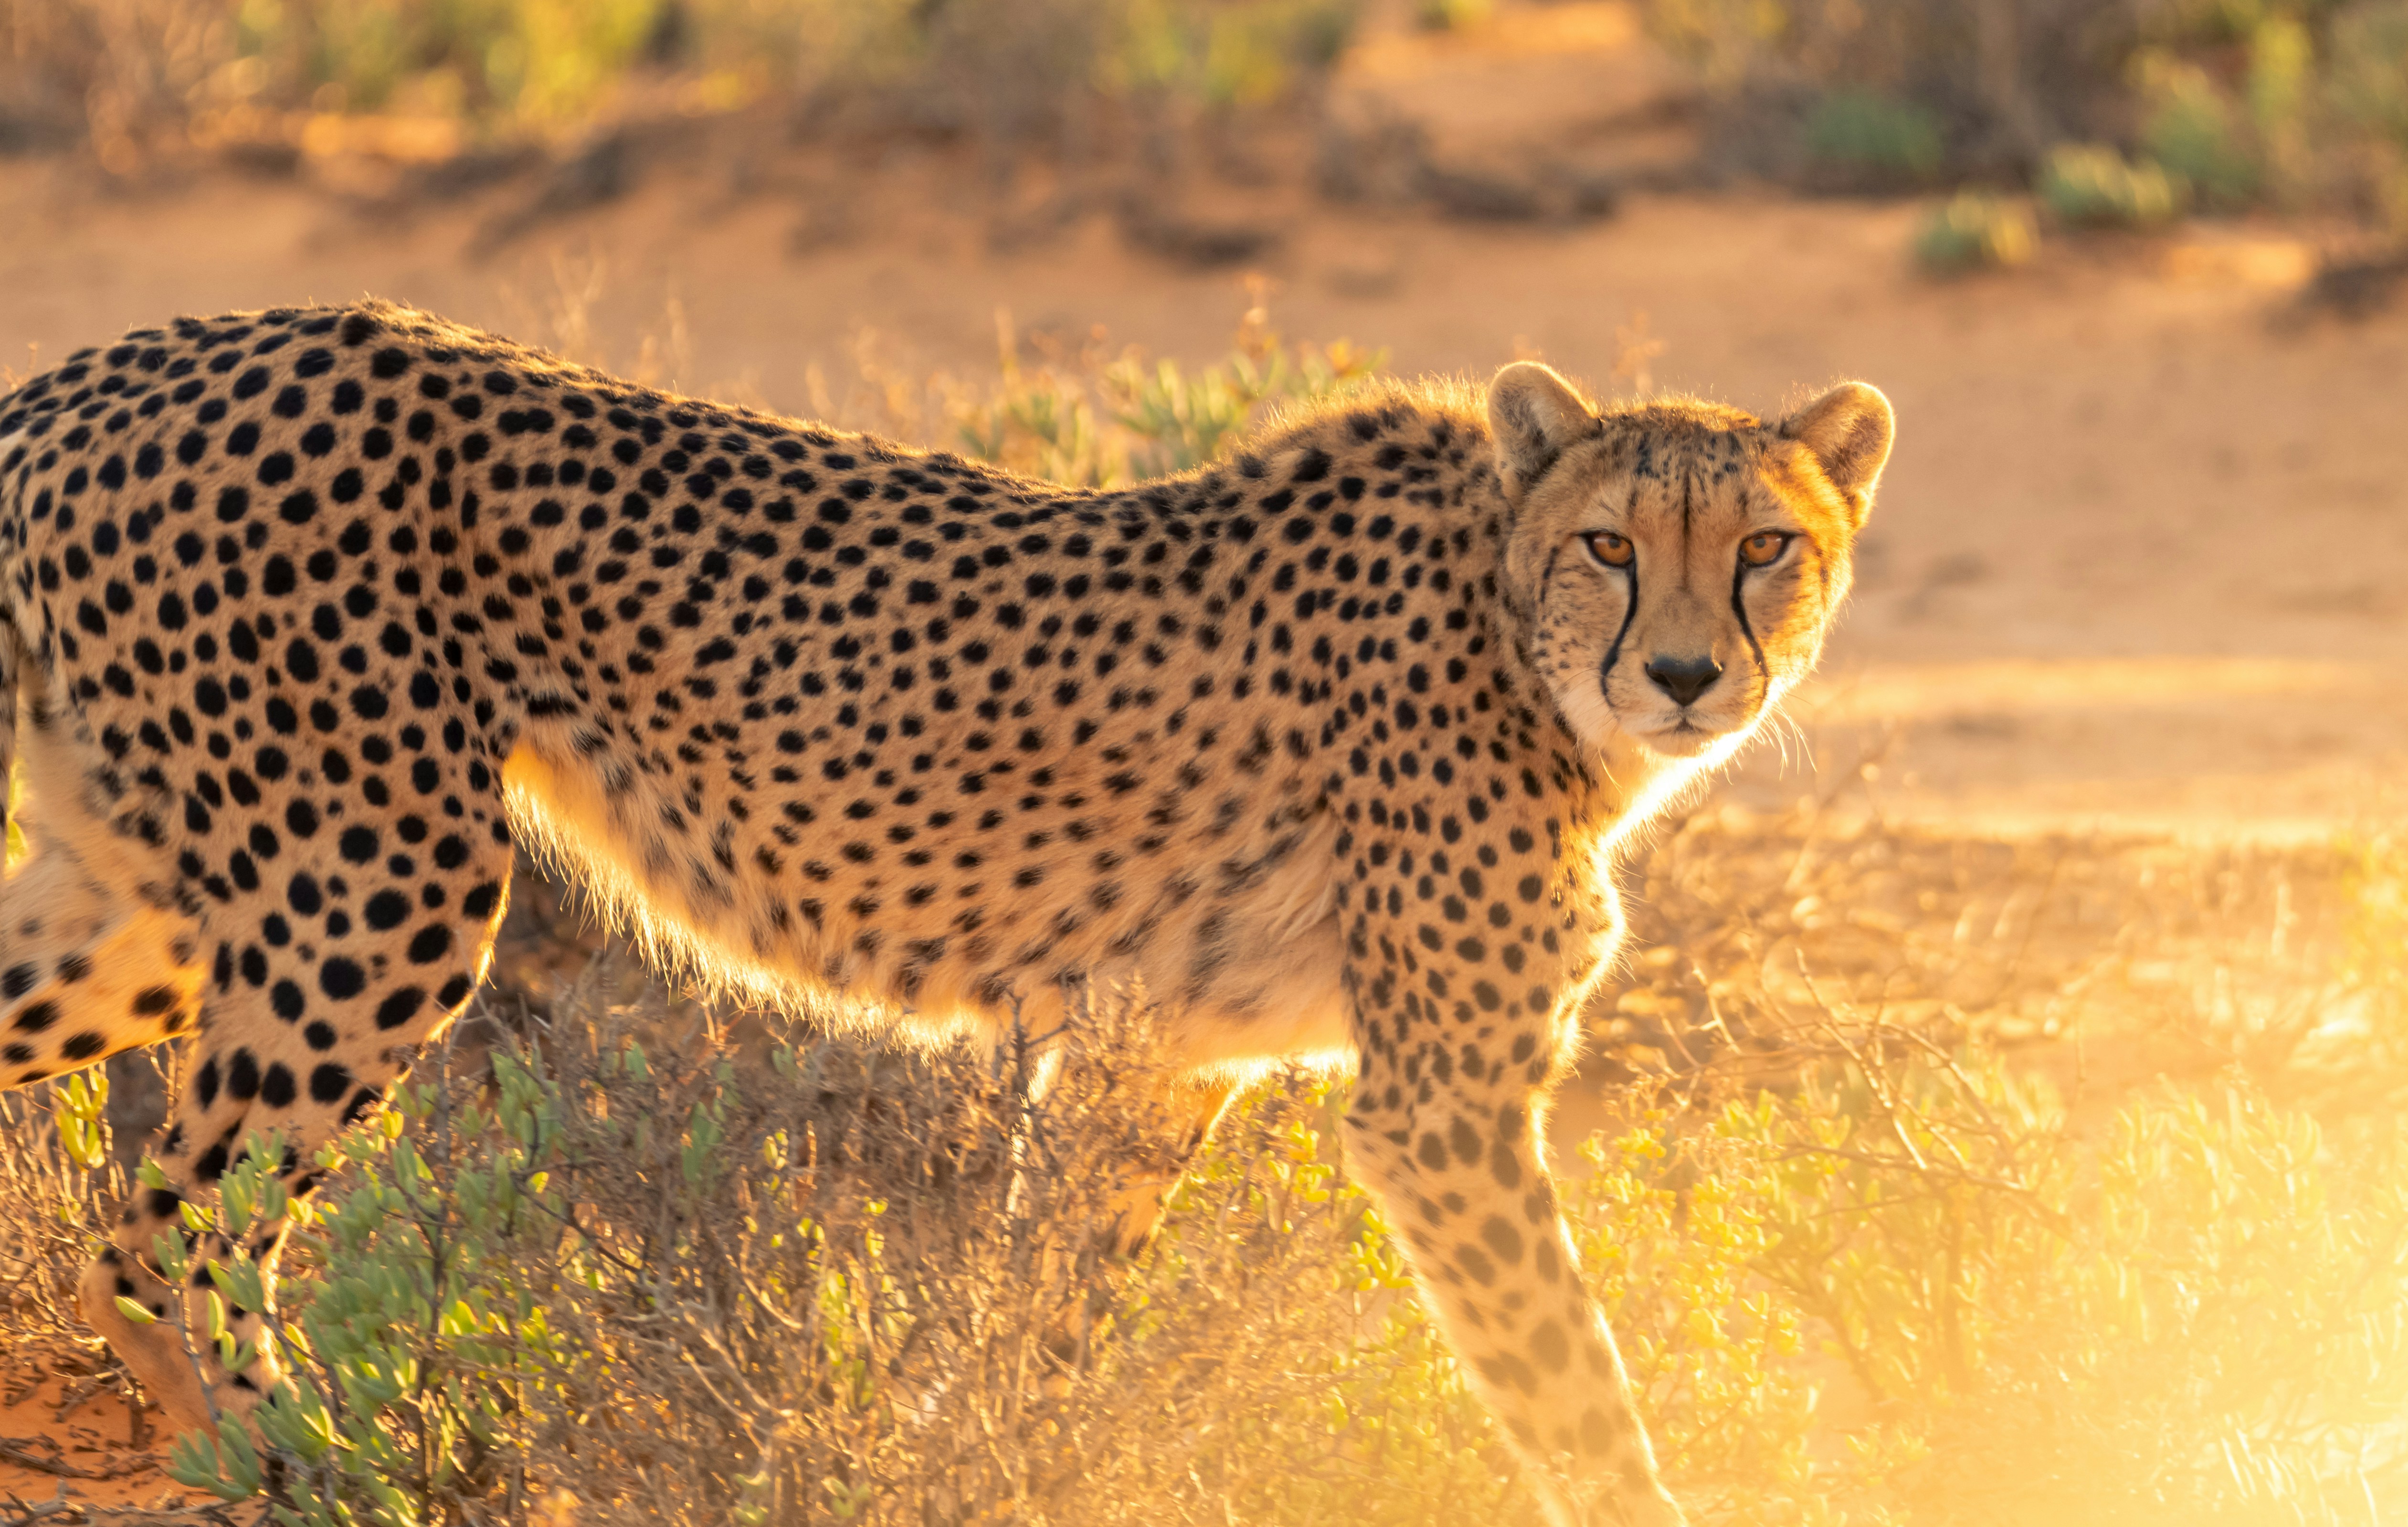 A Cheetah at the Inverdoorn Game Reserve in South Africa being rehabiliated and prepared to be allowed to roam free in a national park.